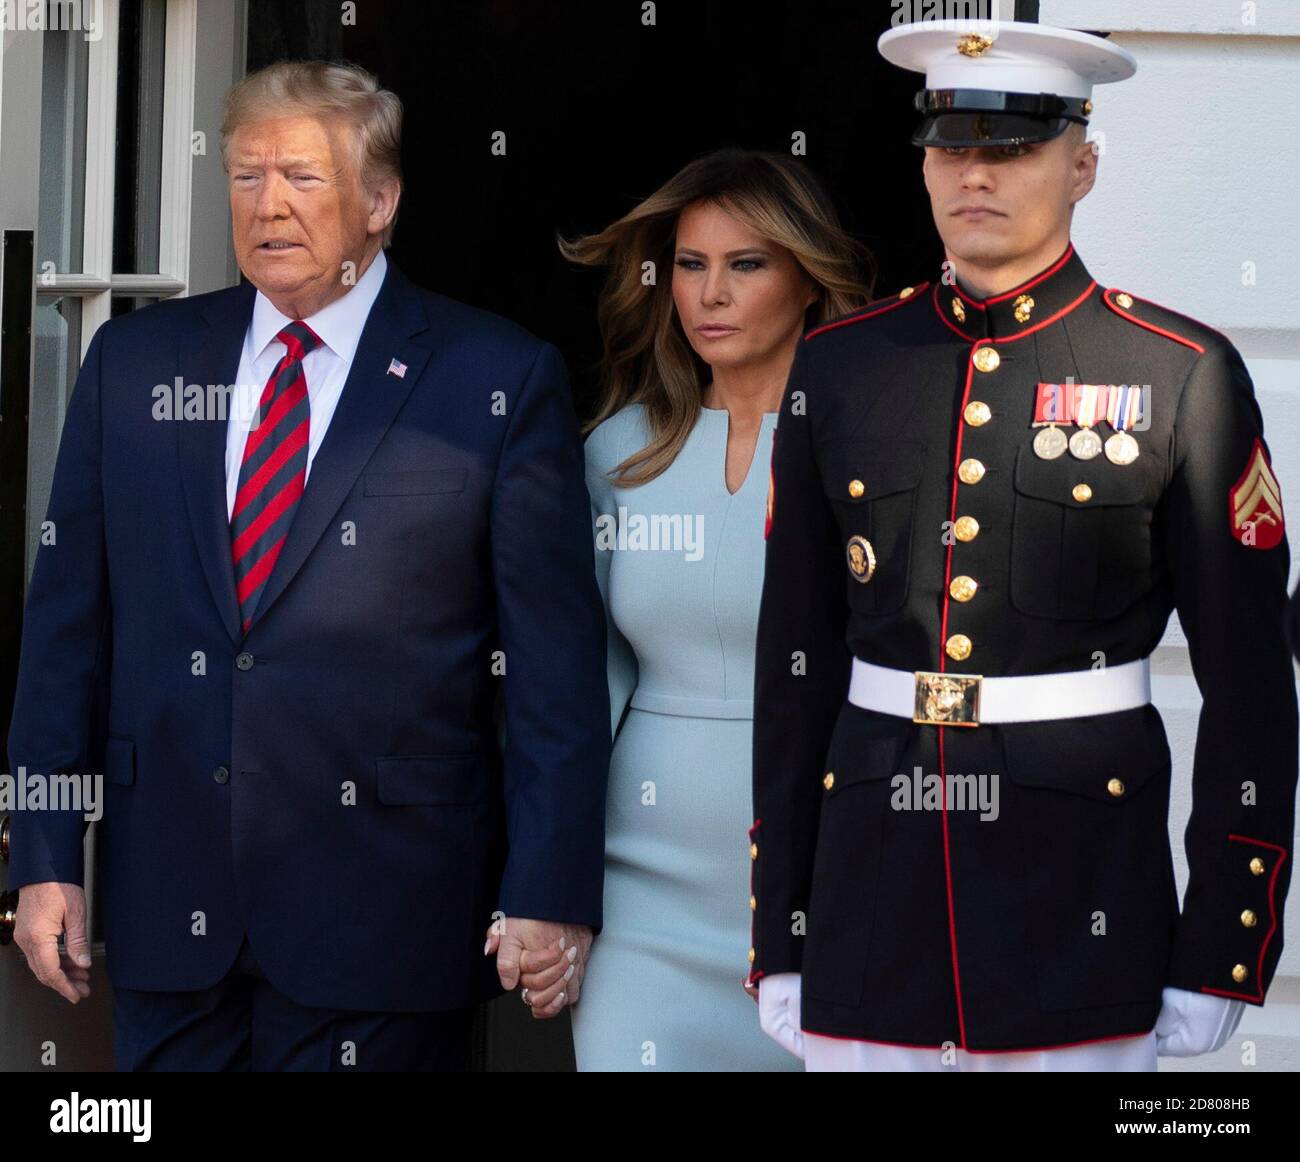 U.S. President Donald Trump and First Lady Melania Trump arrive prior to the state visit of Australian Prime Minister Scott Morrison and his wife Jenny as the conduct an official state visit to the White House on September 9th, 2019 in Washington, D.C. Credit: Alex Edelman/The Photo Access Stock Photo